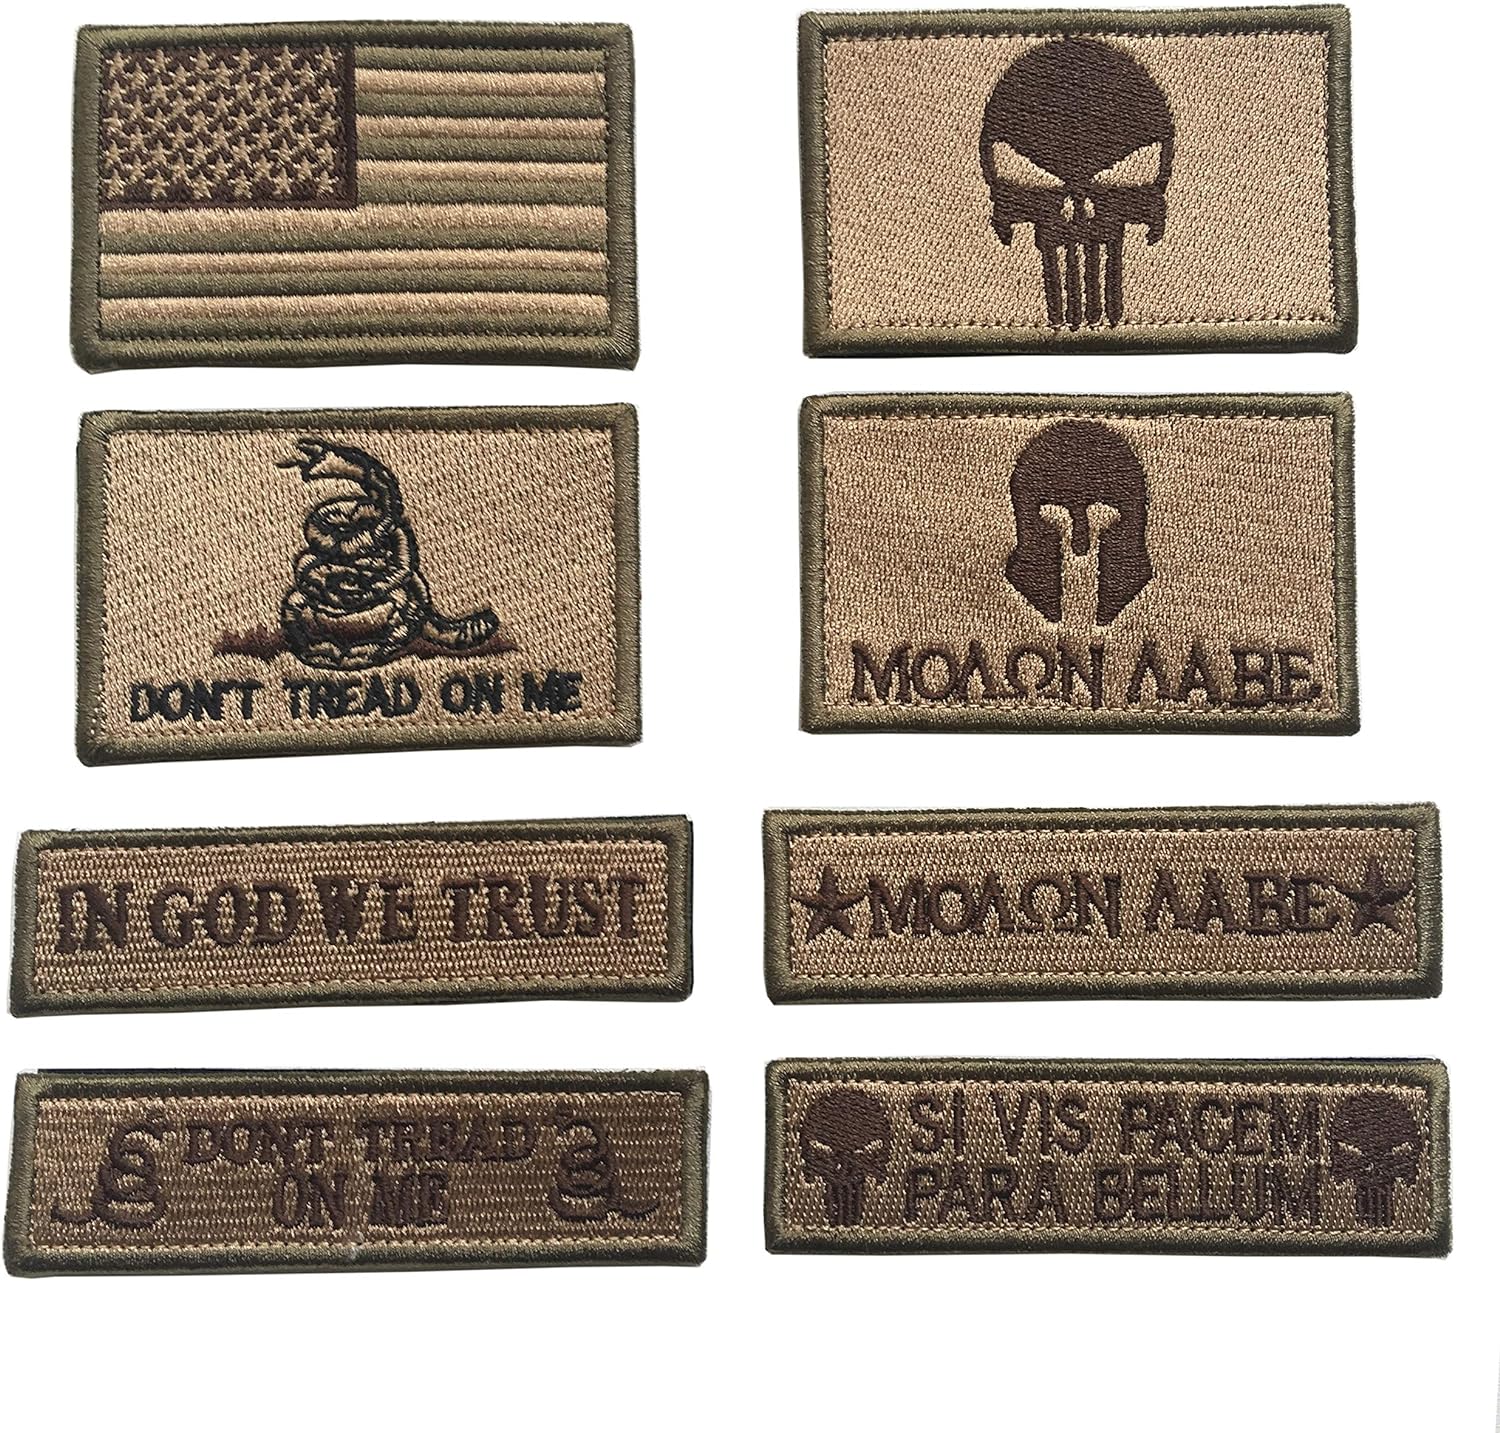 Military Patches WholeSale - Price List, Bulk Buy at SupplyLeader.com